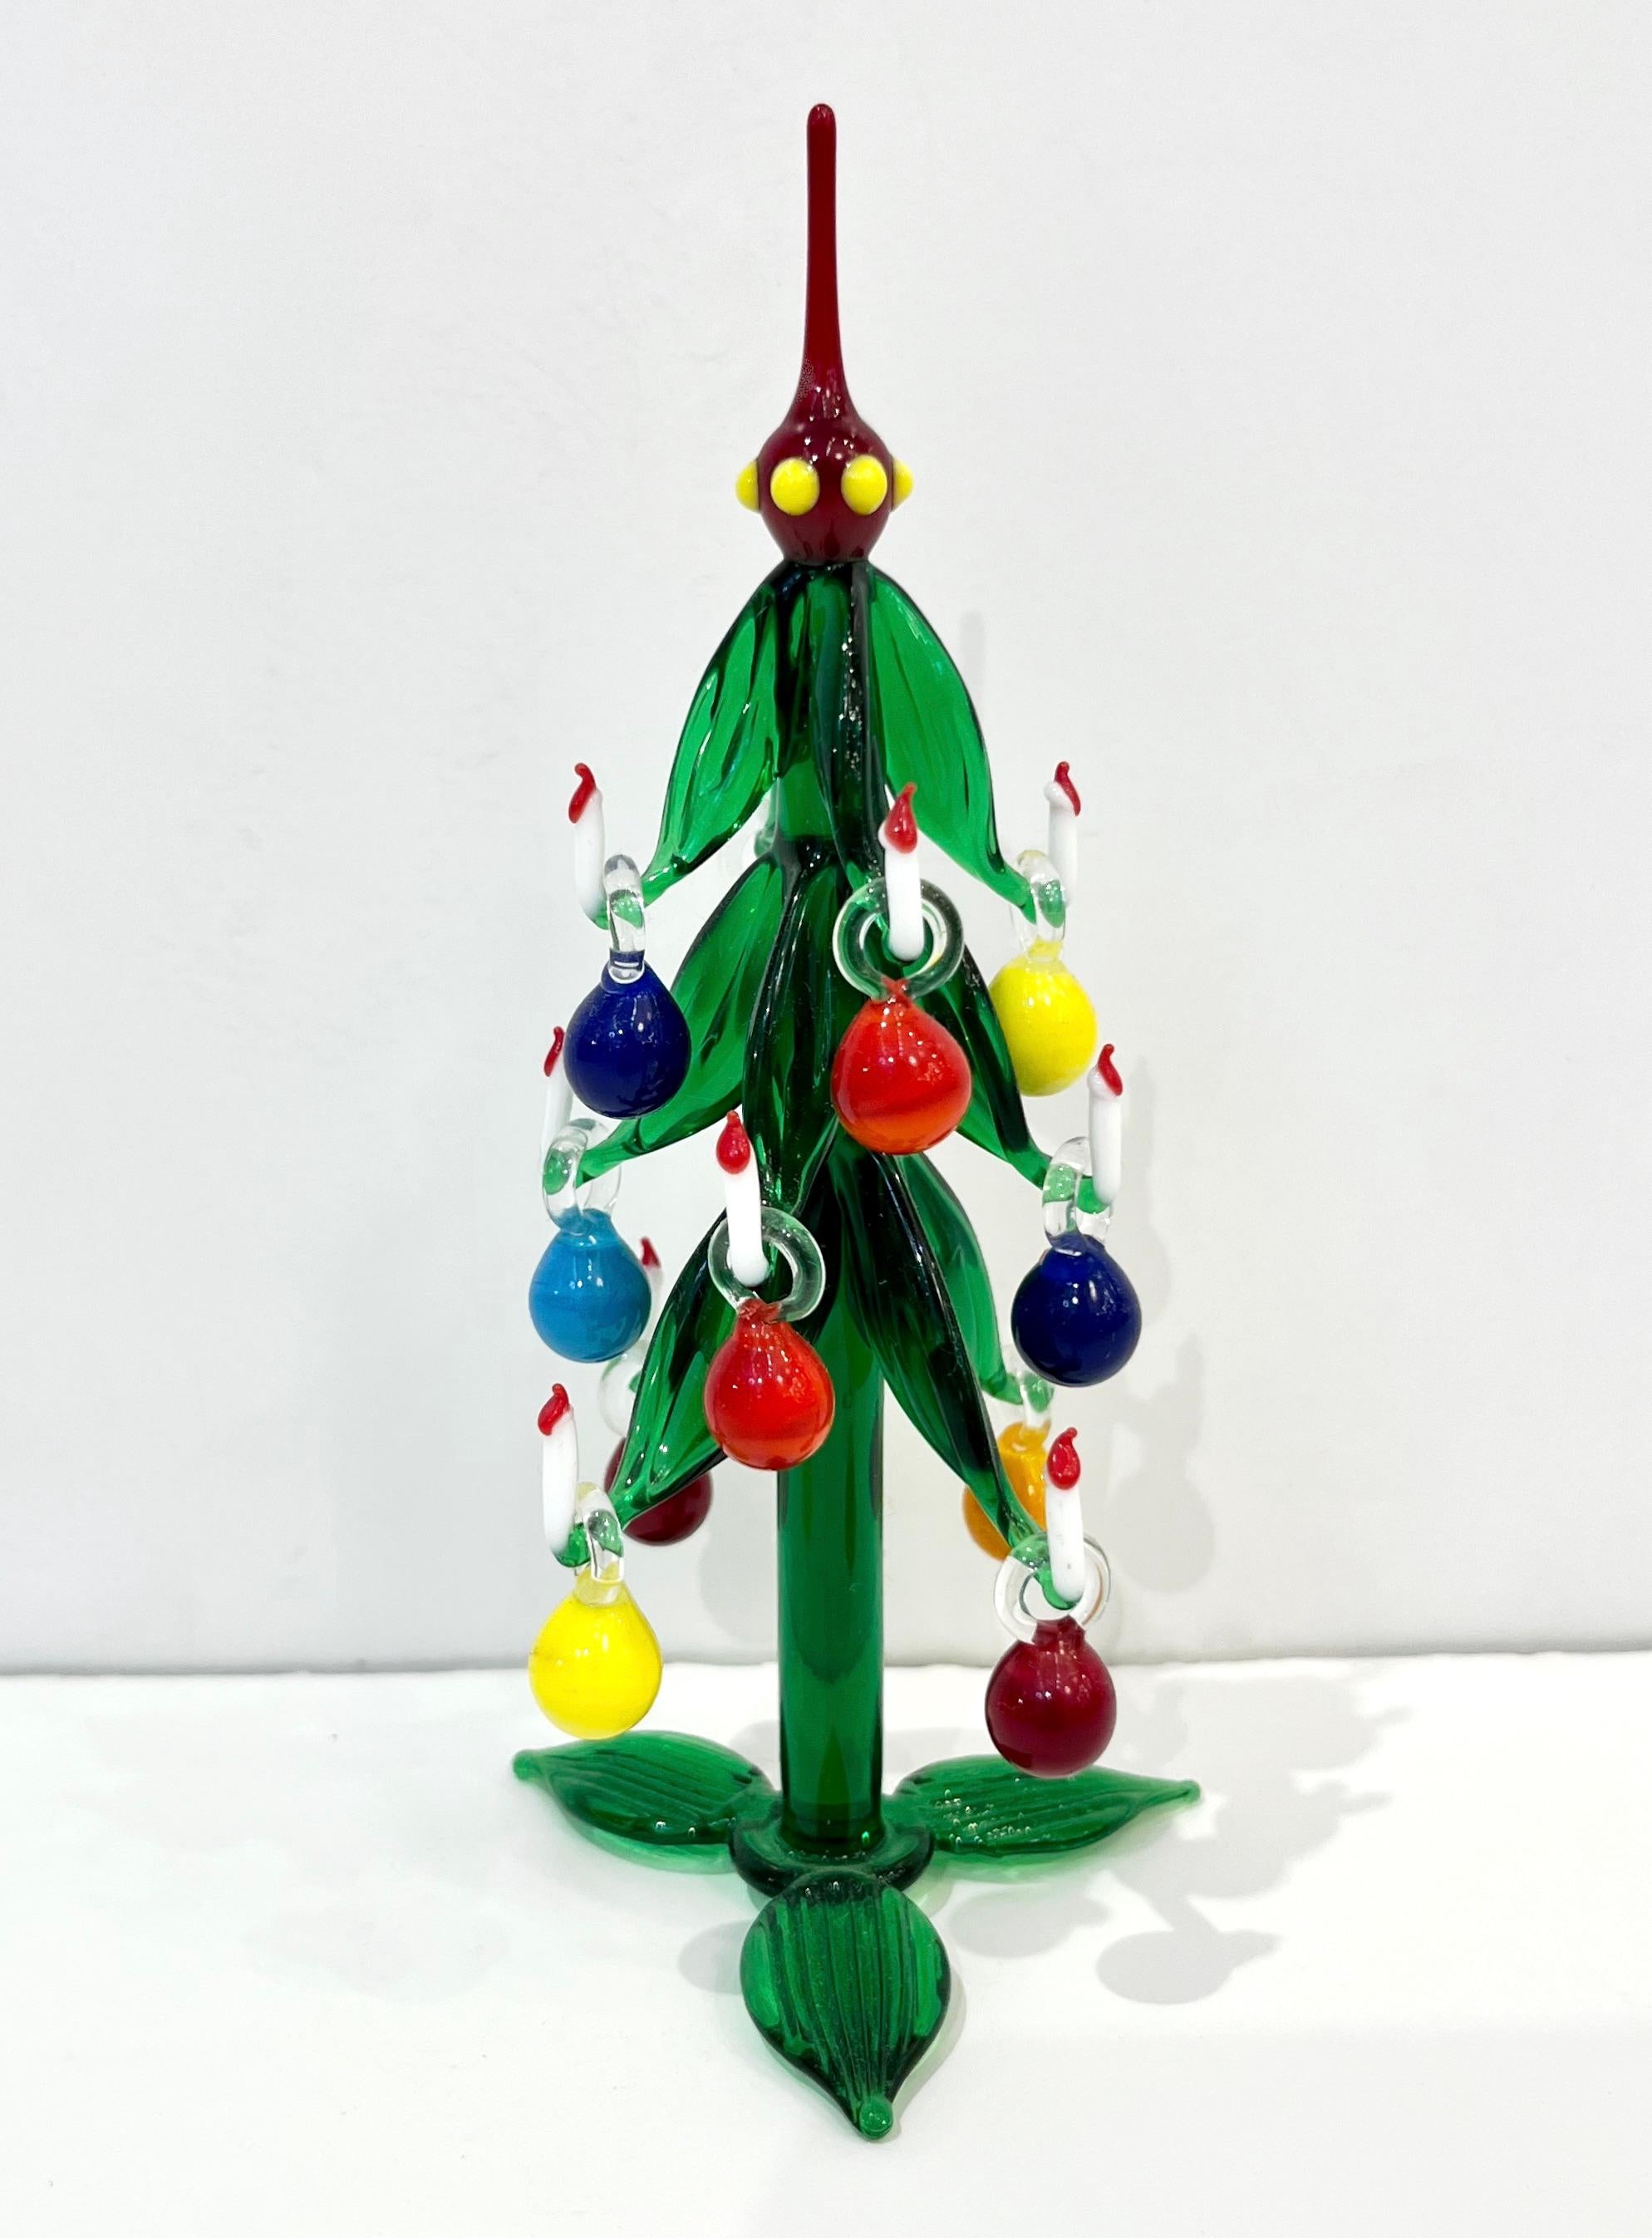 Venetian Murano glass tree of organic modern design, an original creation blown on the Murano island, individually mouth-blown and handcrafted. The central tree, worked with pulled-out branches ending with miniature white candles, is in crystal